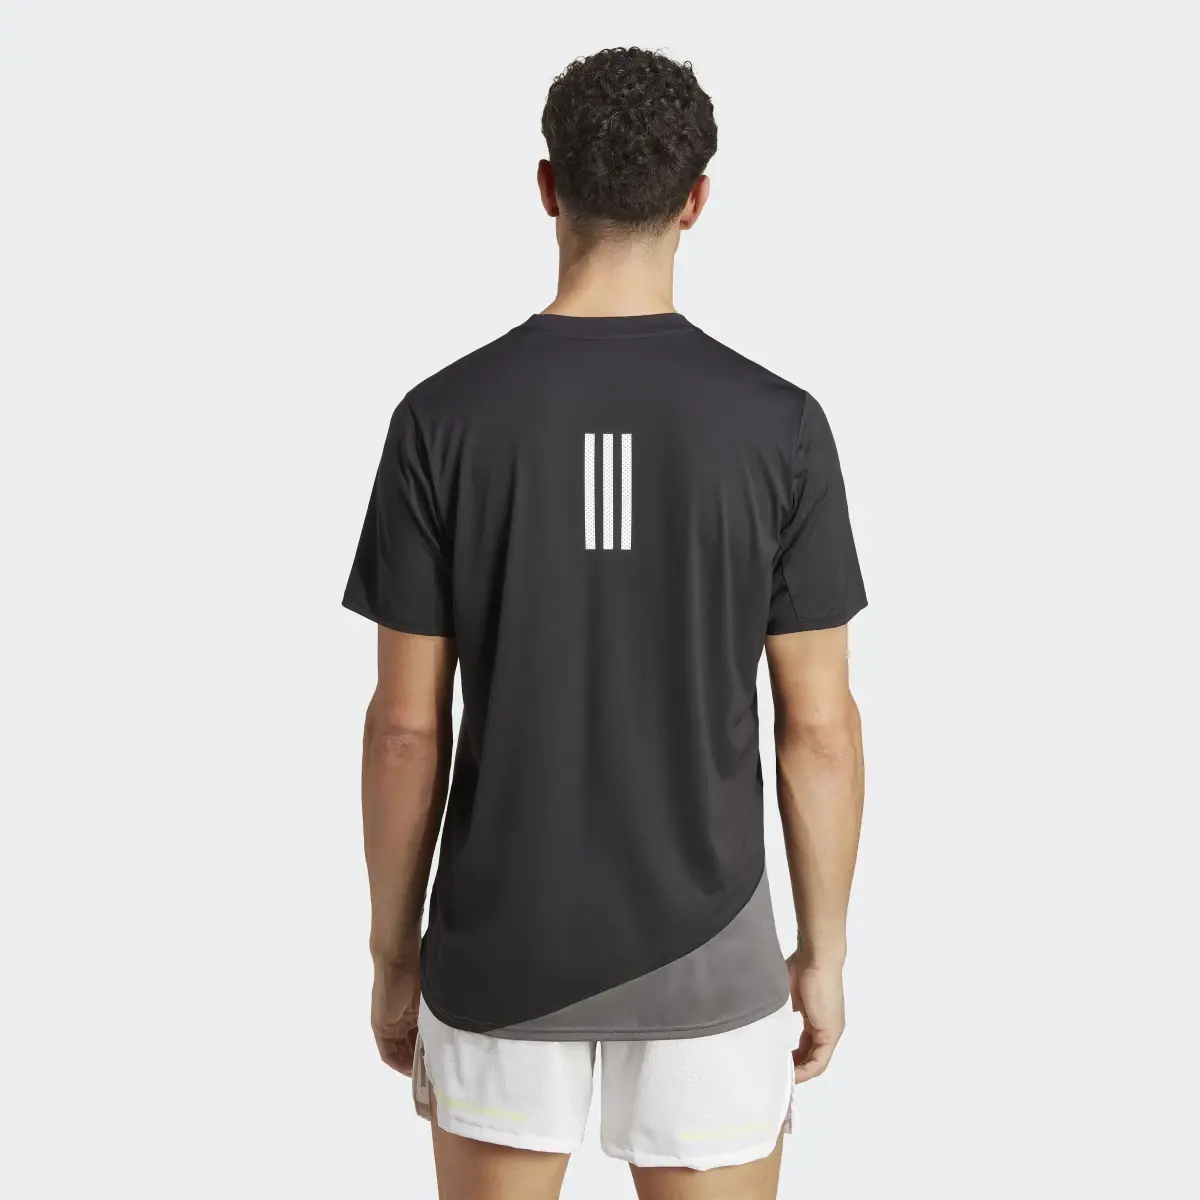 Adidas Made to be Remade Running T-Shirt. 3